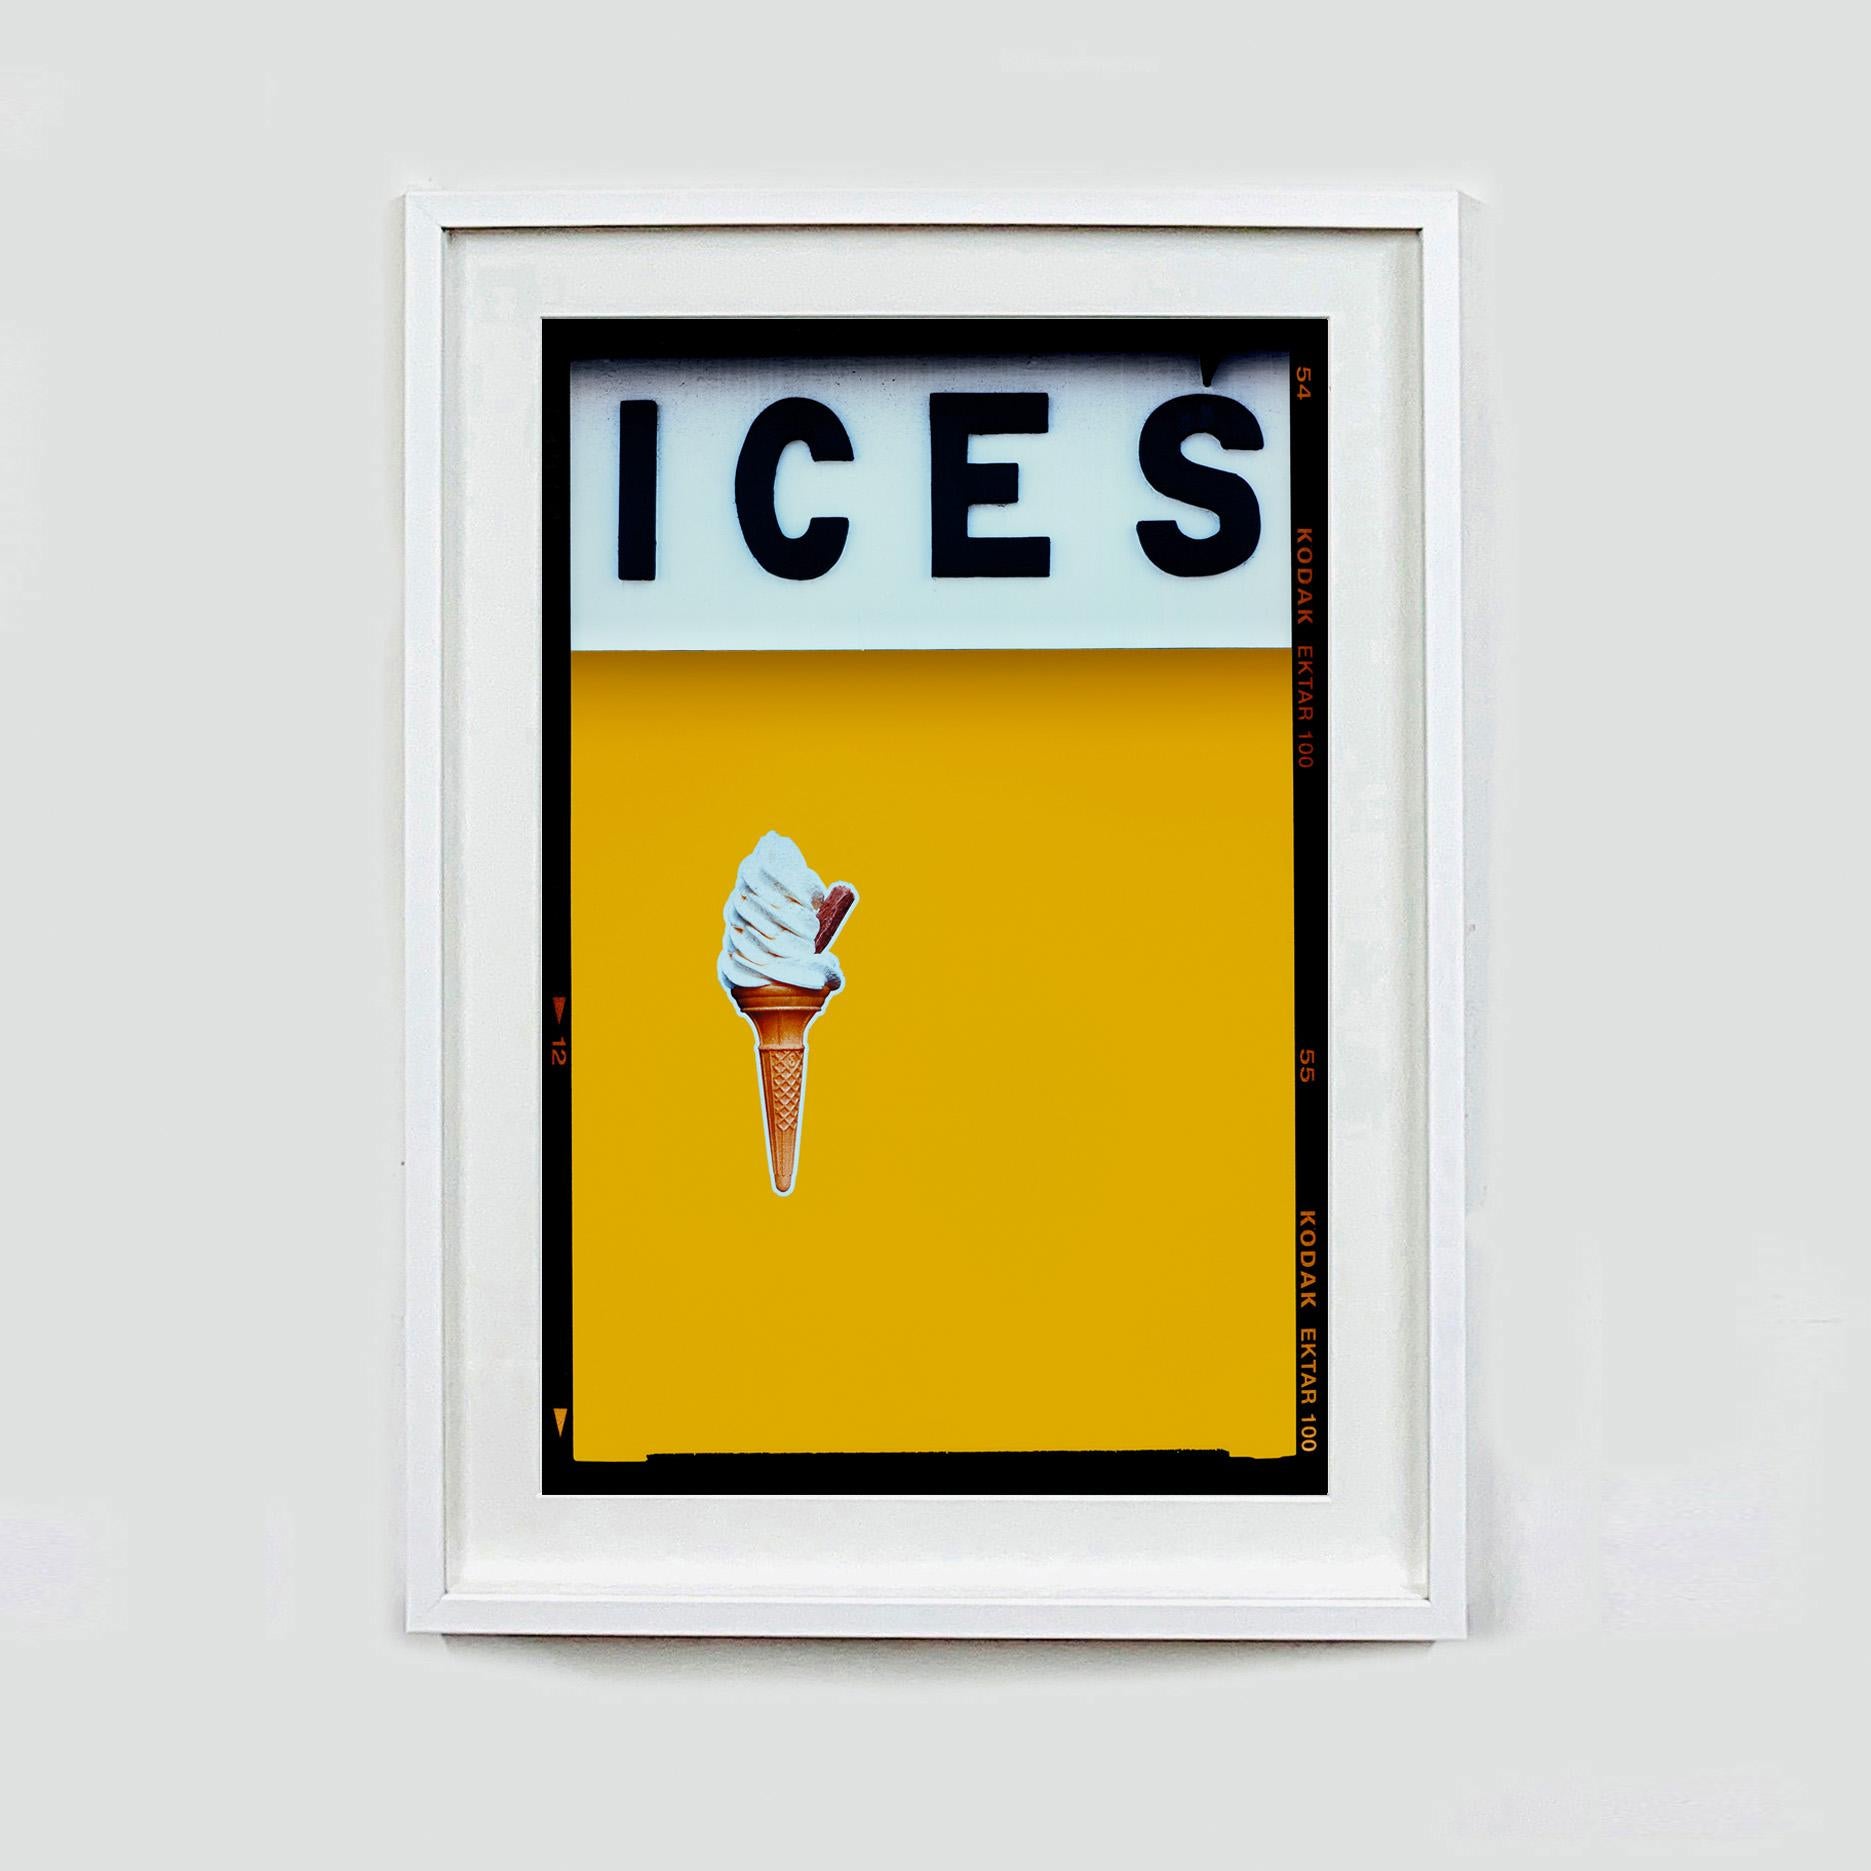 Ices (Mustard Yellow), Bexhill-on-Sea - British seaside color photography - Contemporary Print by Richard Heeps